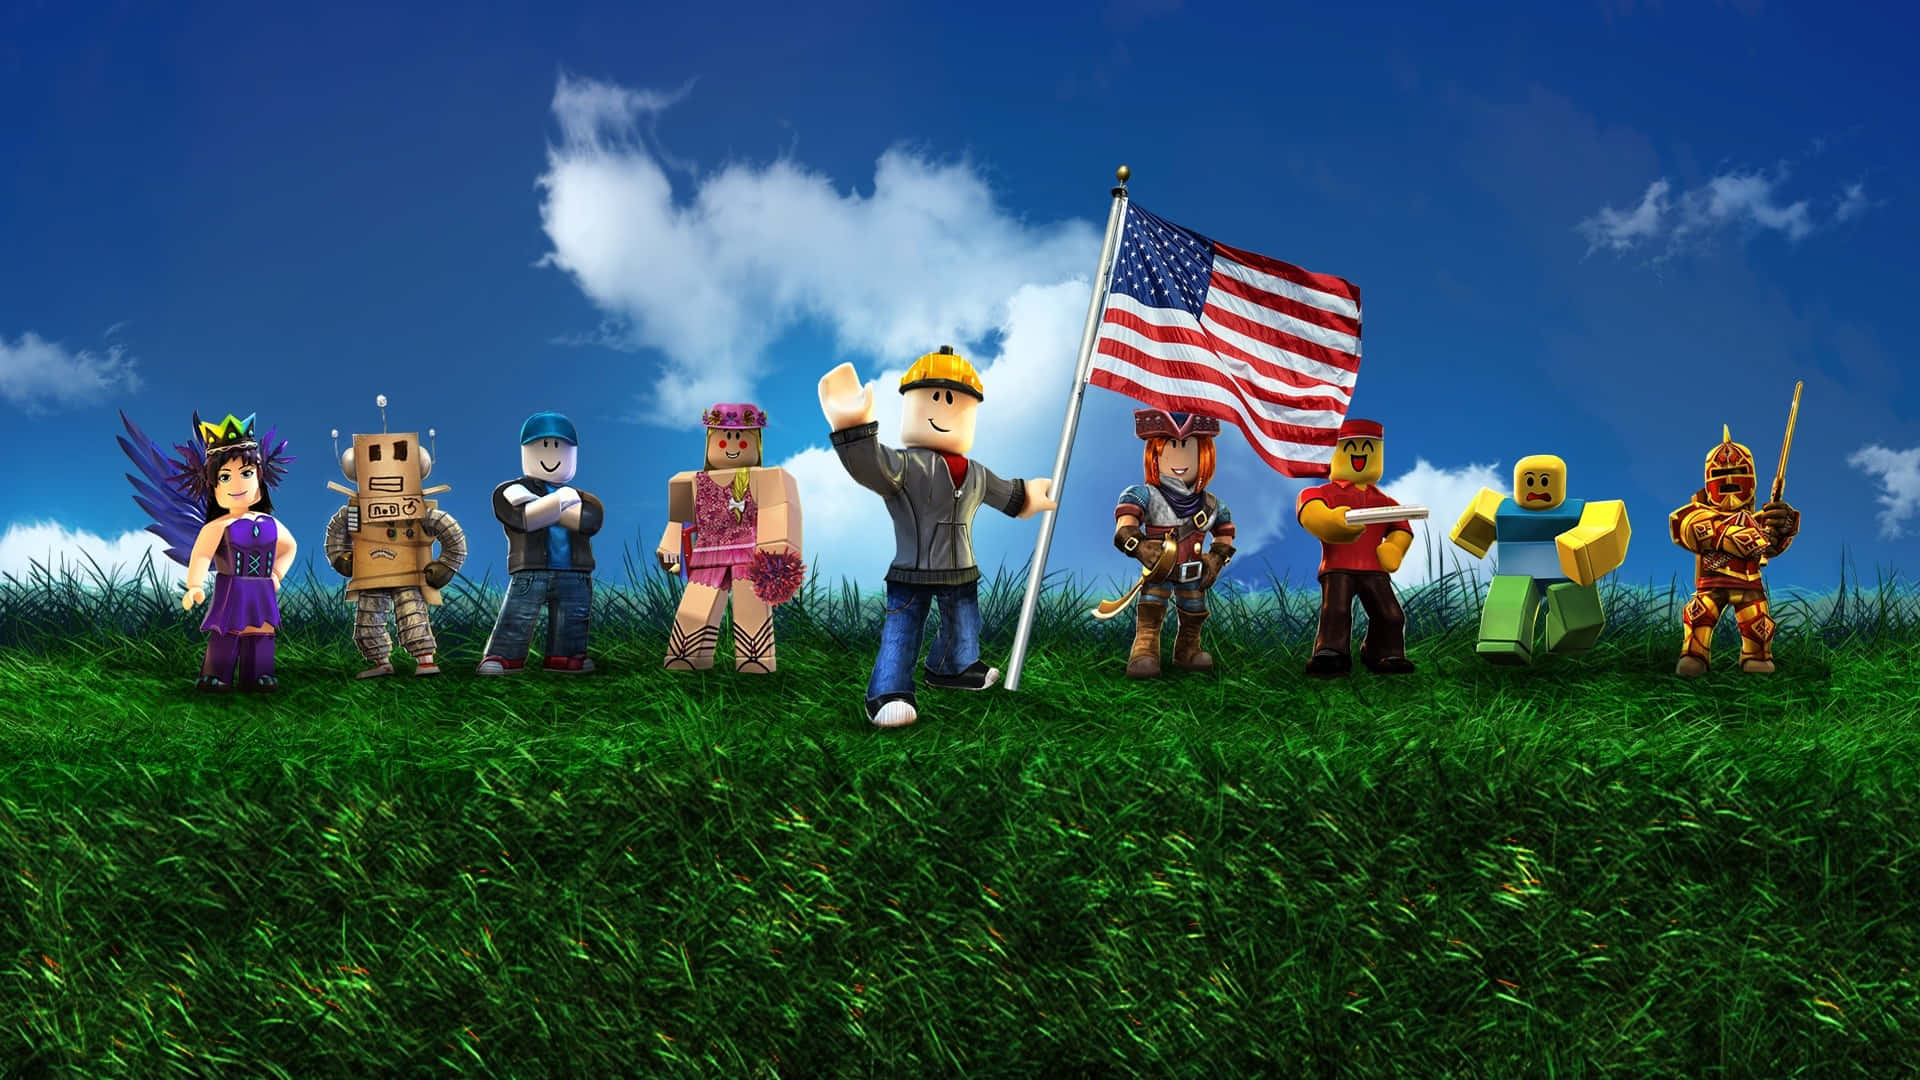 "Be a part of the amazing world of Roblox with your own custom character!" Wallpaper